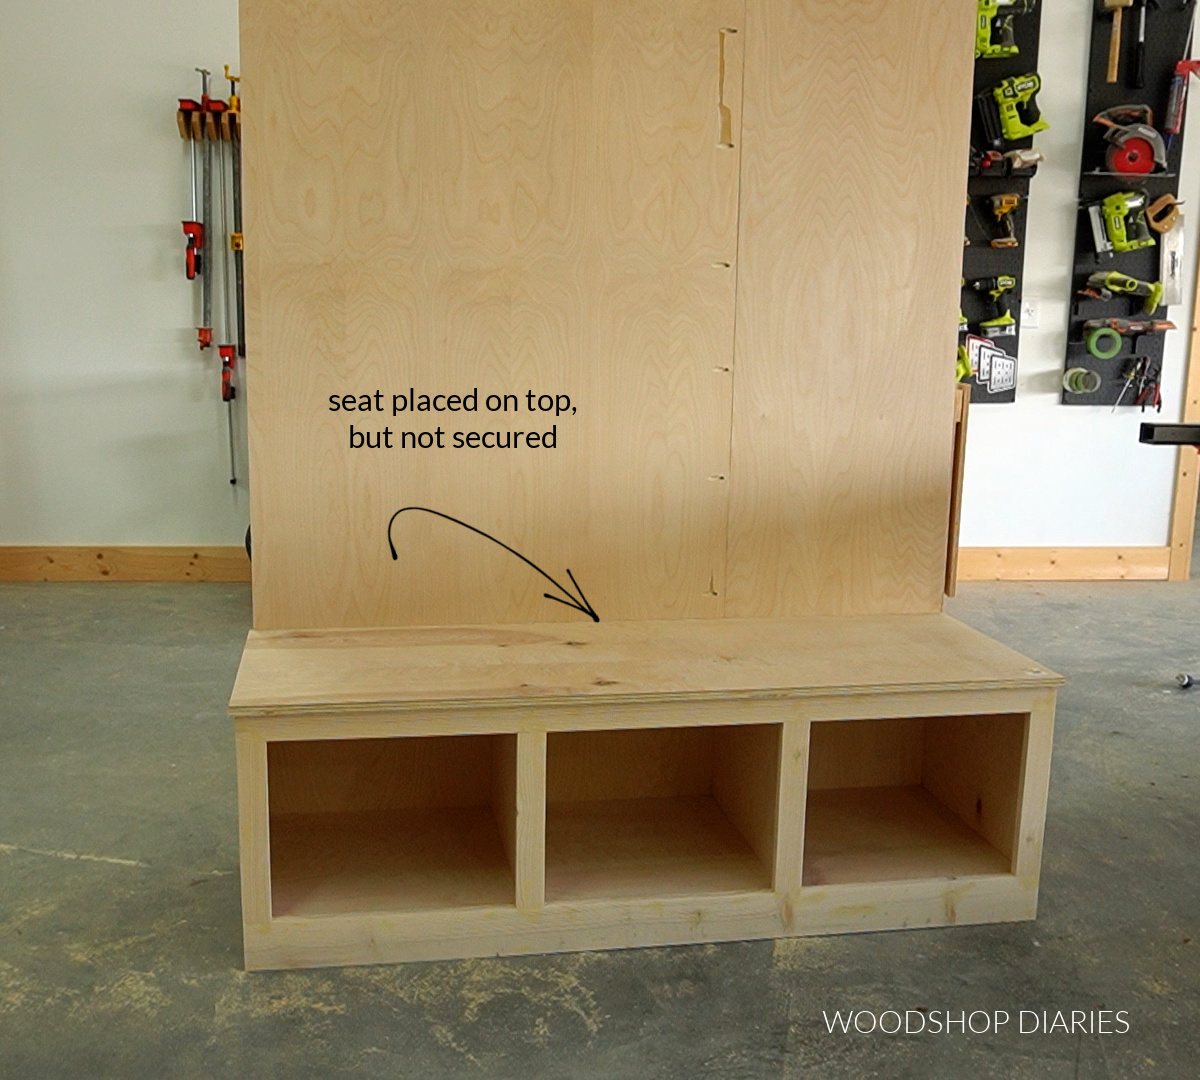 plywood hall tree build progress showing bench seat placed on top